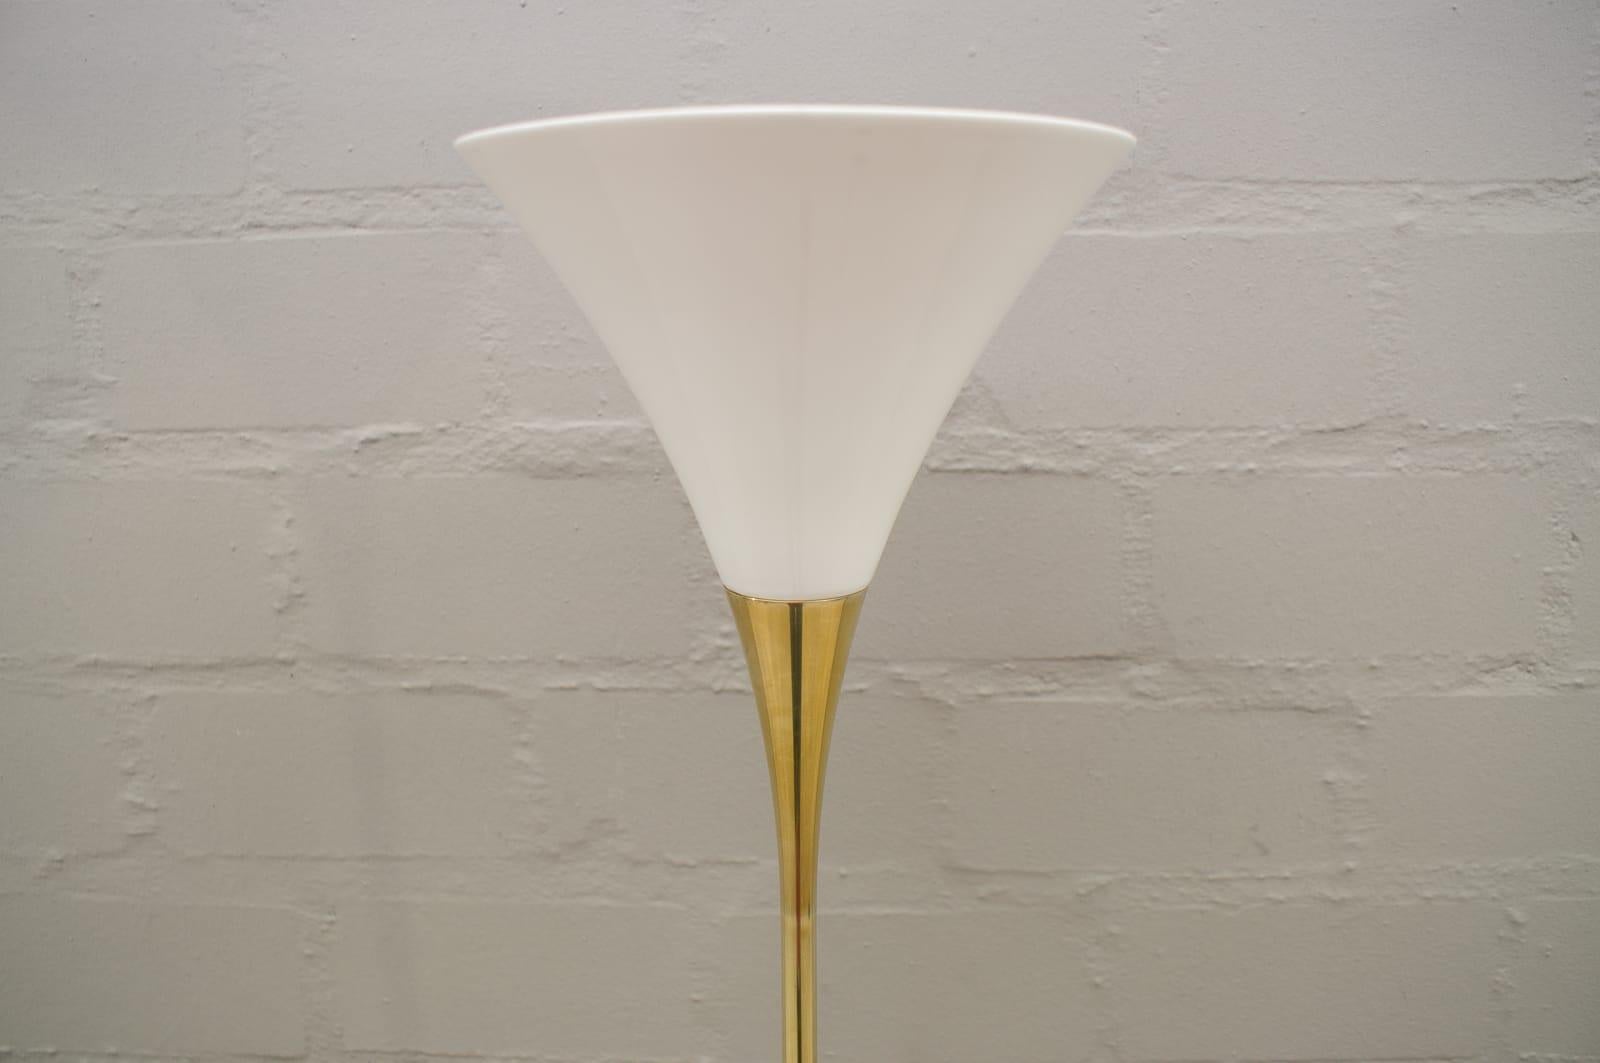 Dimensions 
- Total height: 180 cm
- Lampshade (diameter) Ø 23 cm
- Foot (diameter): Ø 26 cm
Material:
- Body:
 Ms: brass polished, lacquered

The Lonea room spotlight by Florian Schulz fascinates with its simple construction, which appears